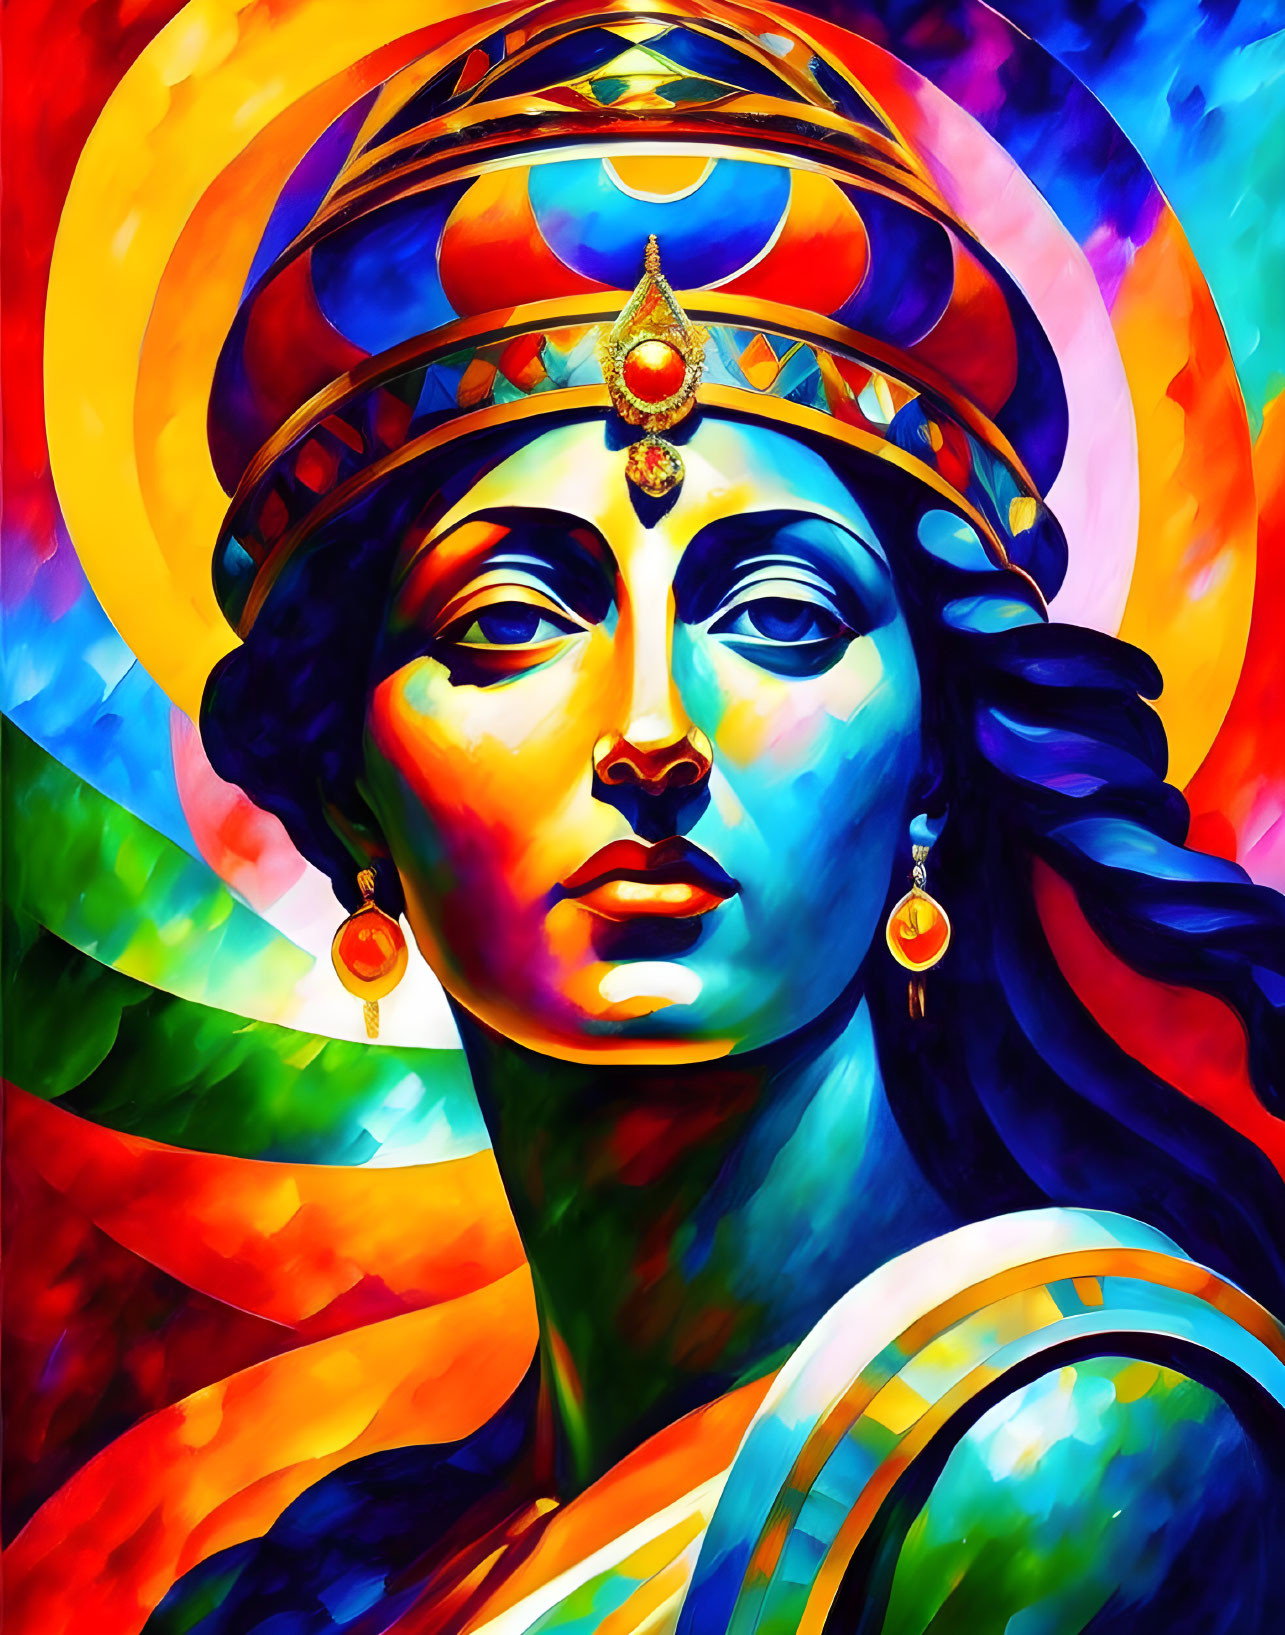 OUR LADY OF THE MANY FORMS - PROMETHEA 02162023